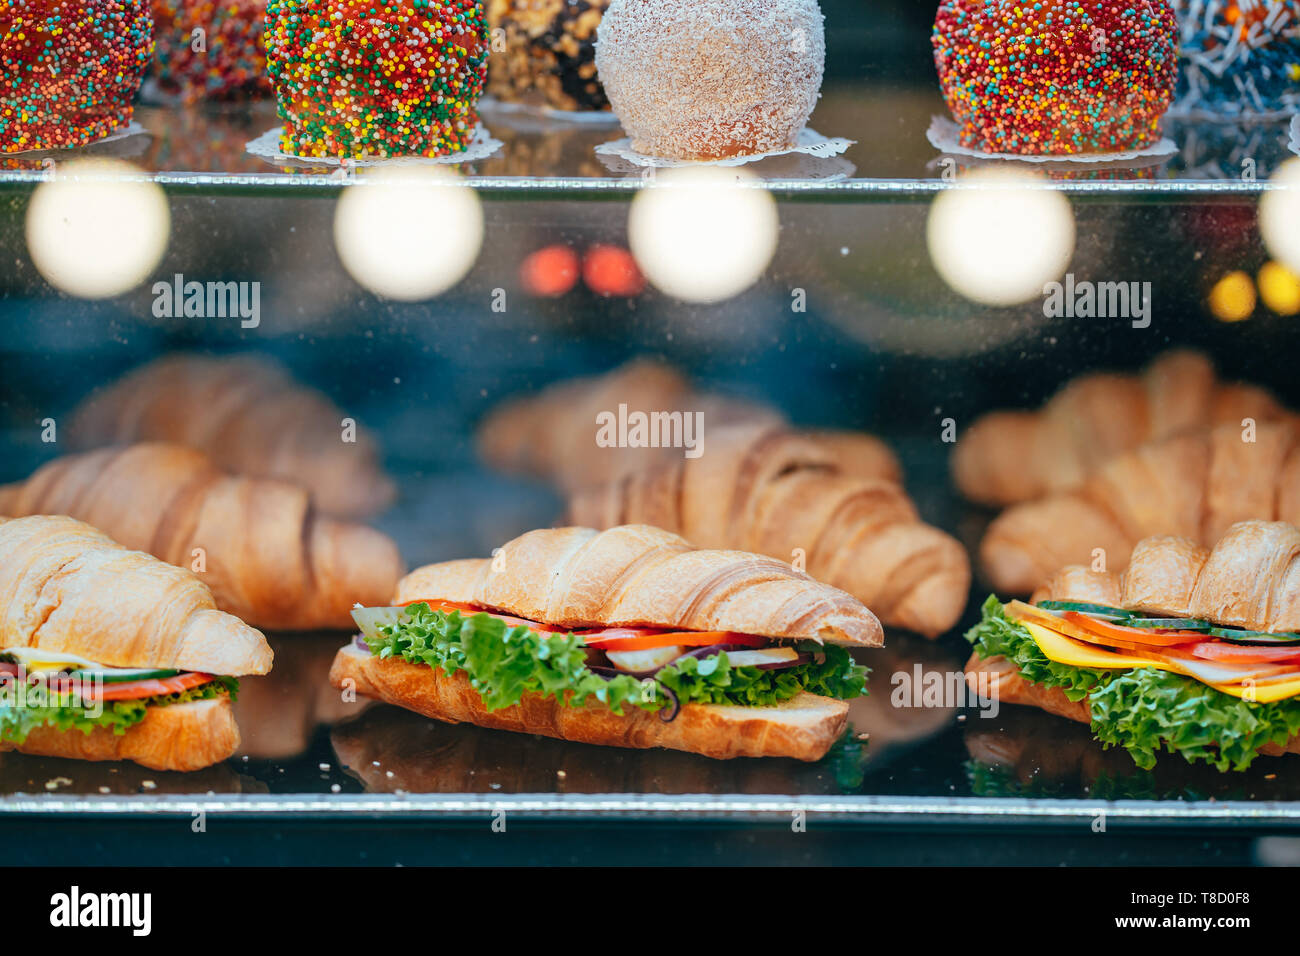 https://c8.alamy.com/comp/T8D0F8/fresh-sandwiches-with-meat-lie-on-the-display-T8D0F8.jpg